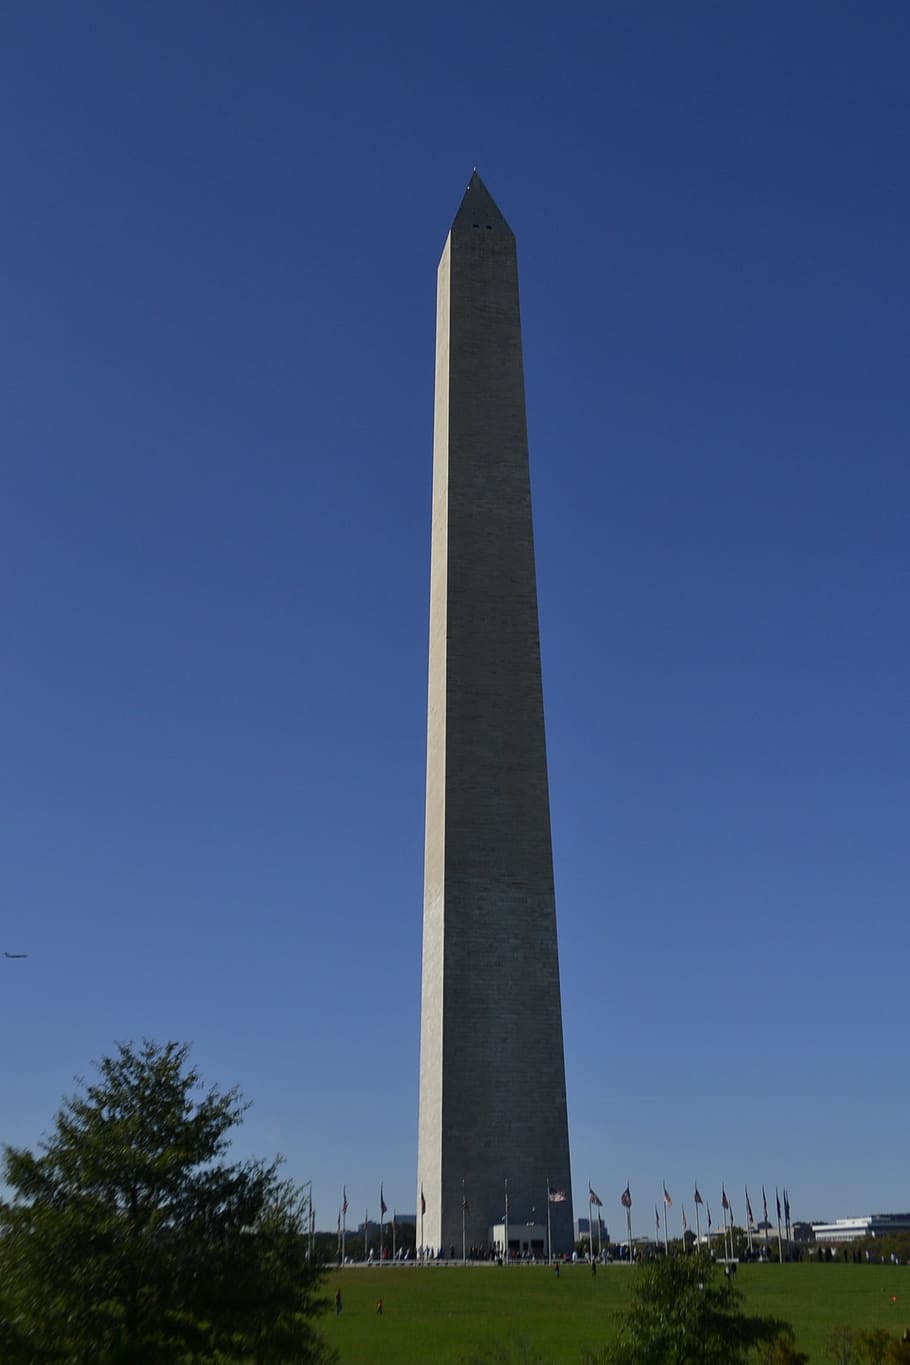 washington monument, tall building, memorial, attraction, famous, nation's capital, park, national, symbol, architecture